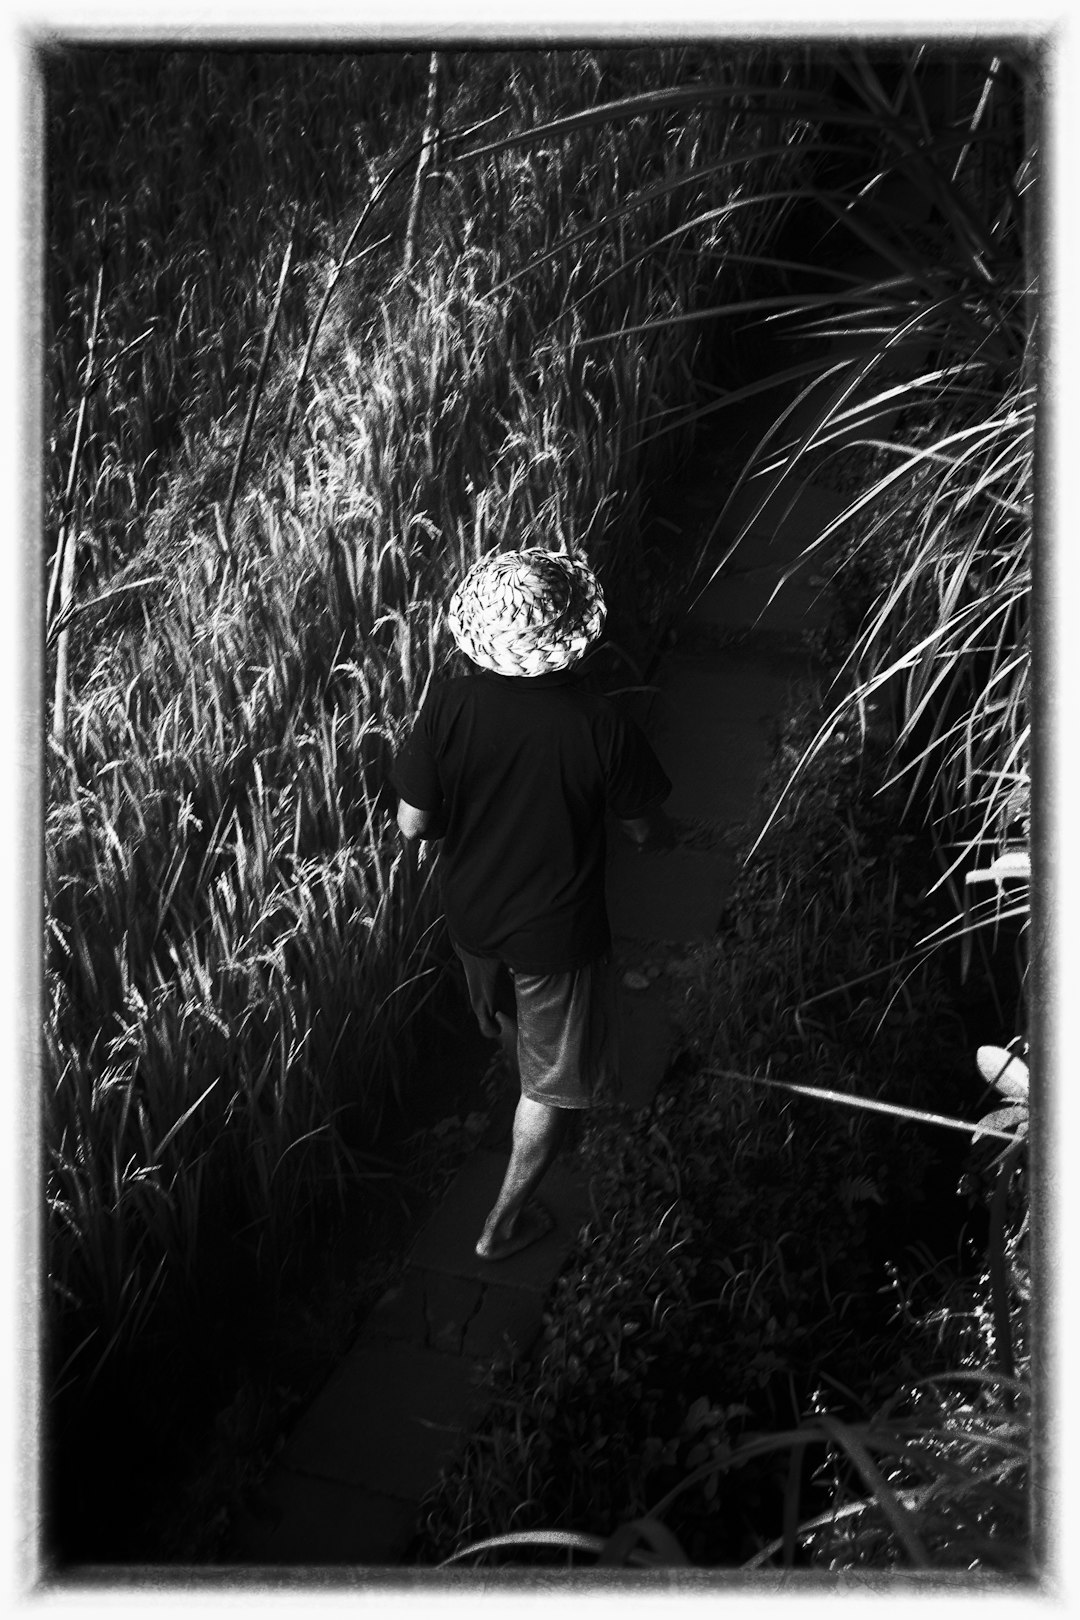 grayscale photography of person wearing hat walking near rice field